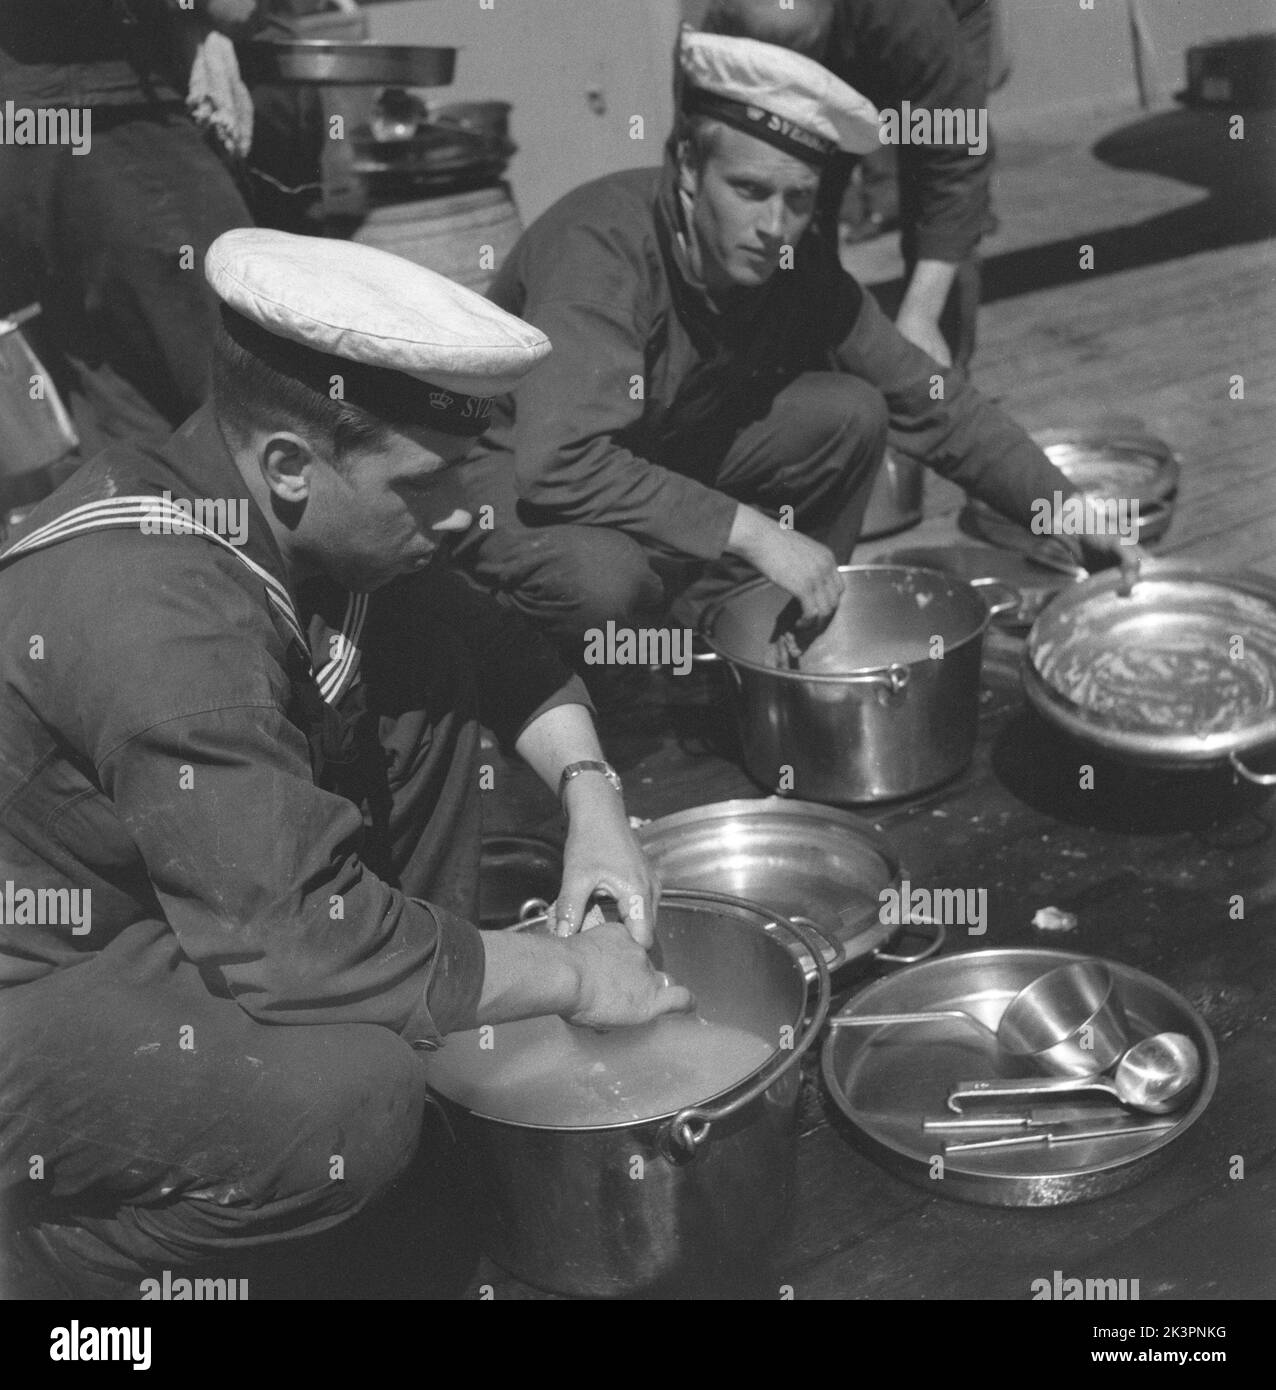 During World war II. The war ship Sverige during navy exercises at sea. Two sailors are seen cleaning the pots and pans on deck. Sweden june 1940. Kristoffersson ref 141 Stock Photo